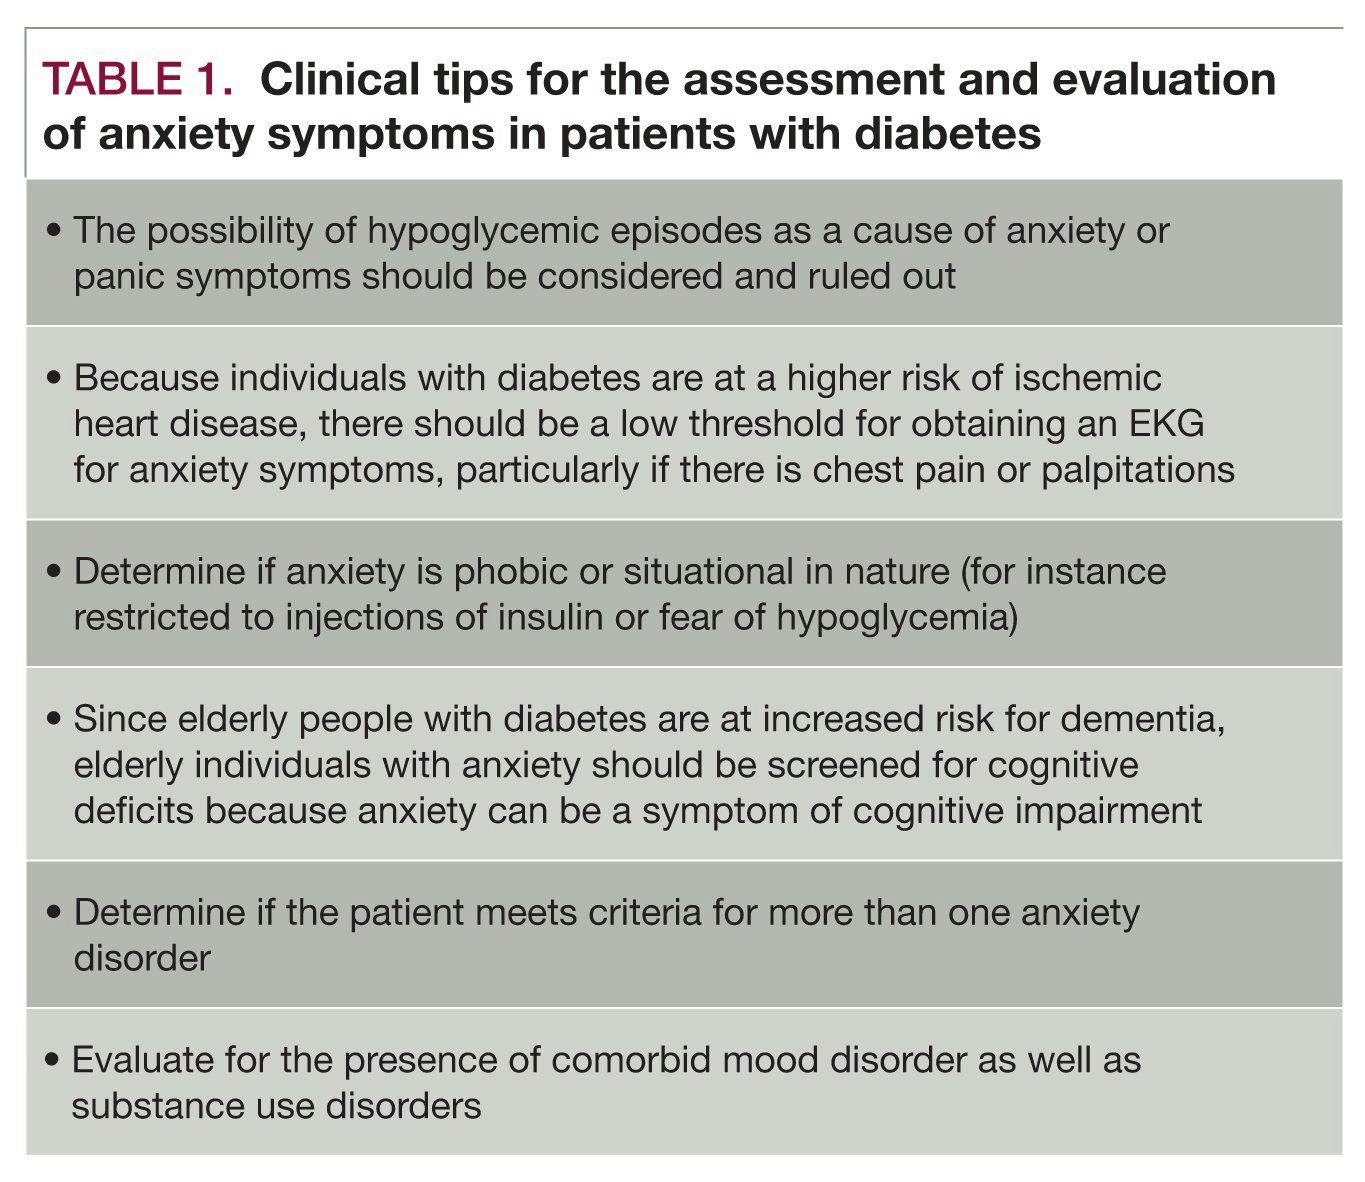 Clinical tips for the assessment and evaluation of anxiety symptoms in 